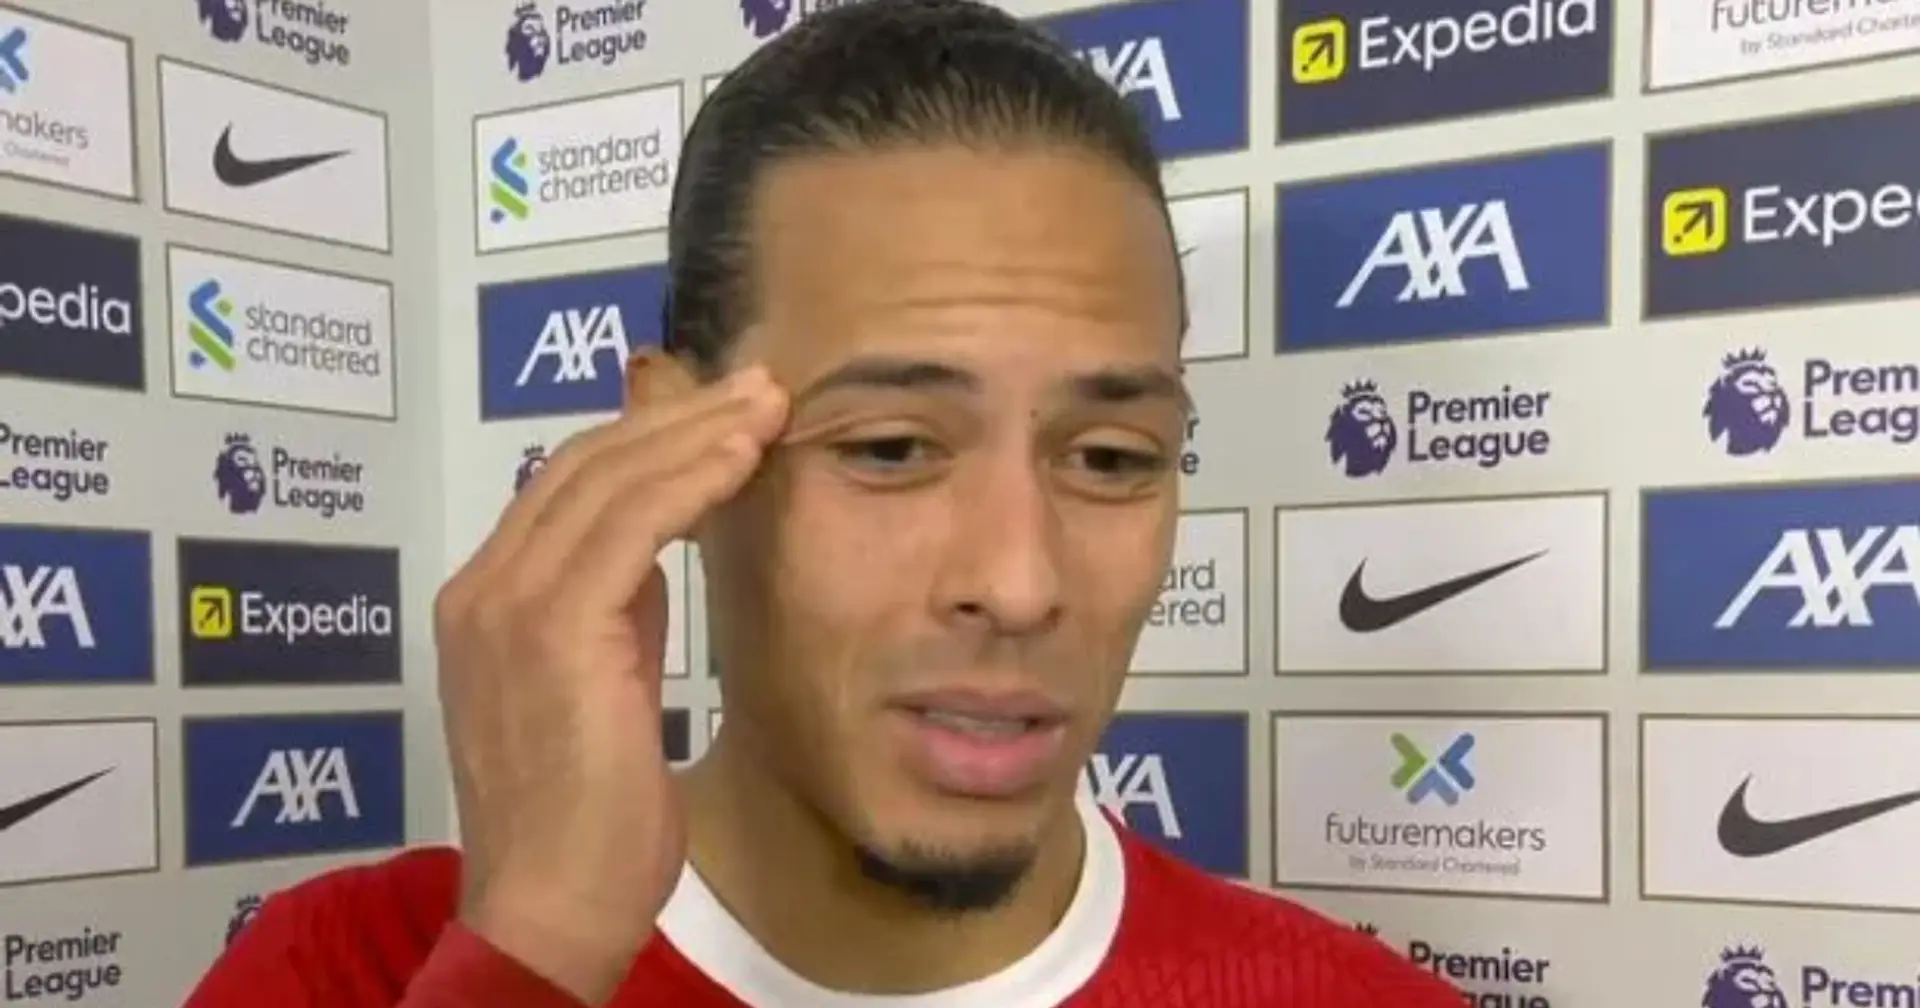 'Very difficult to stay calm': Virgil van Dijk admits to some nerves over title race setback